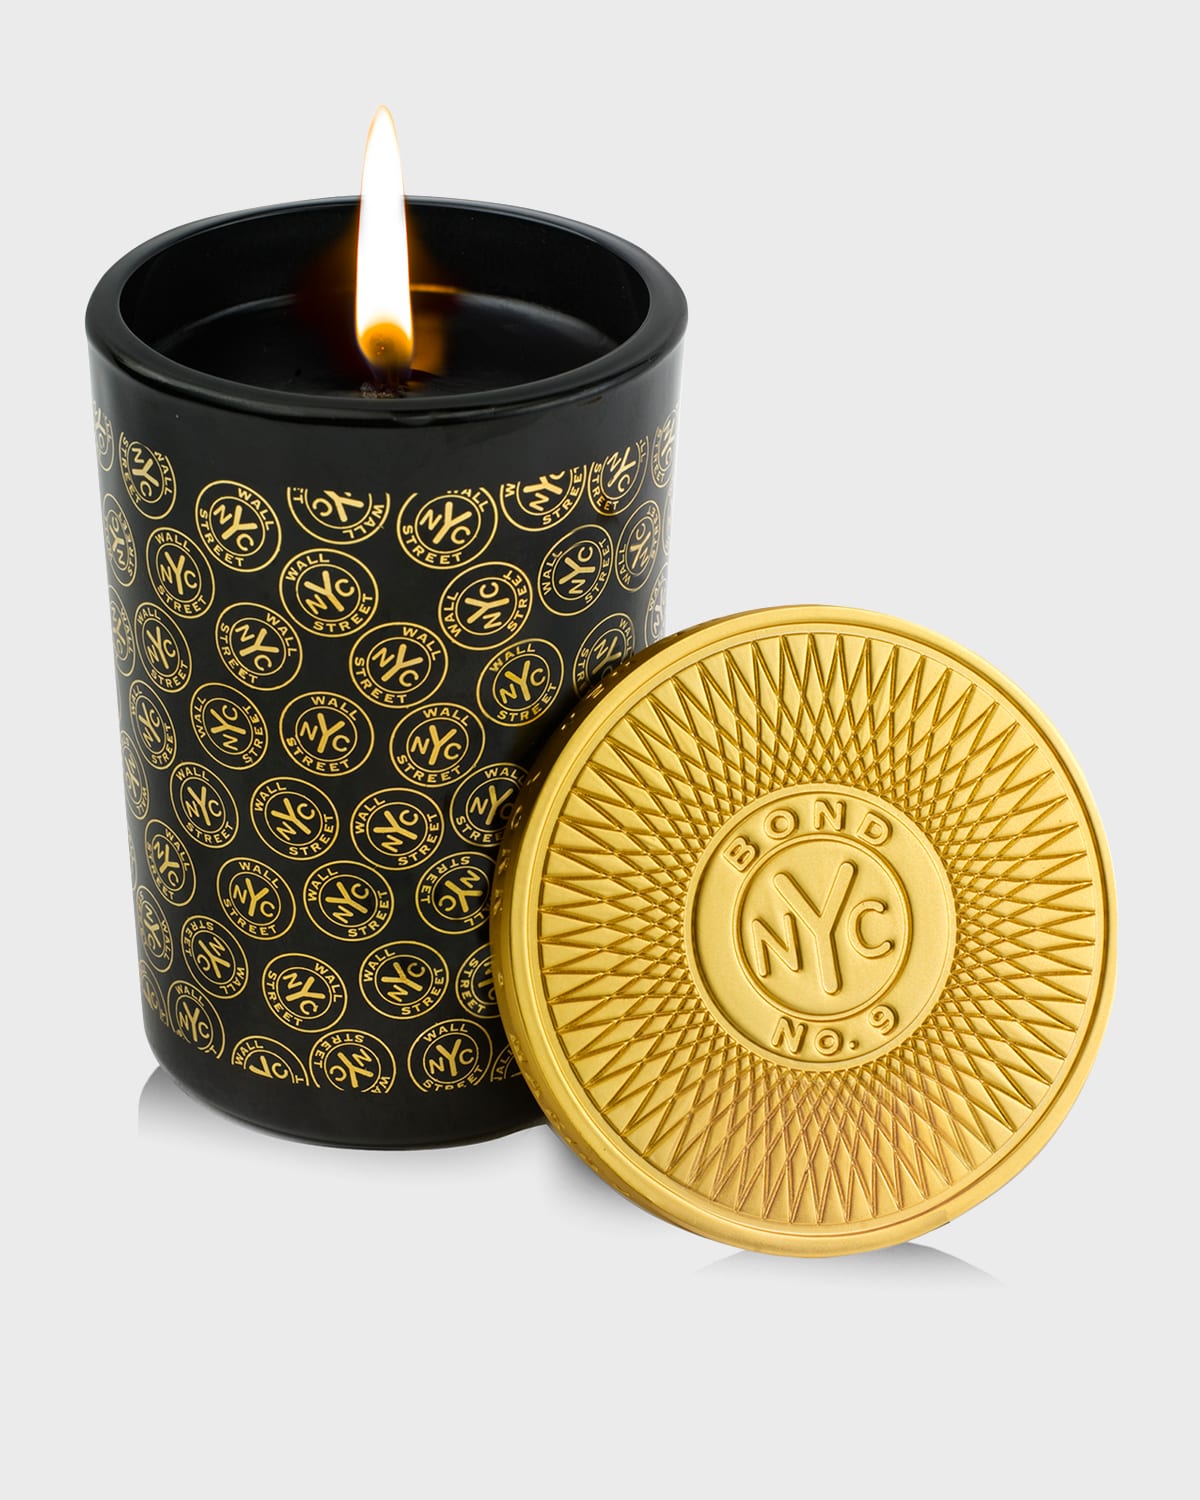 Bond No.9 New York 6.4 Oz. Wall Street Scented Candle